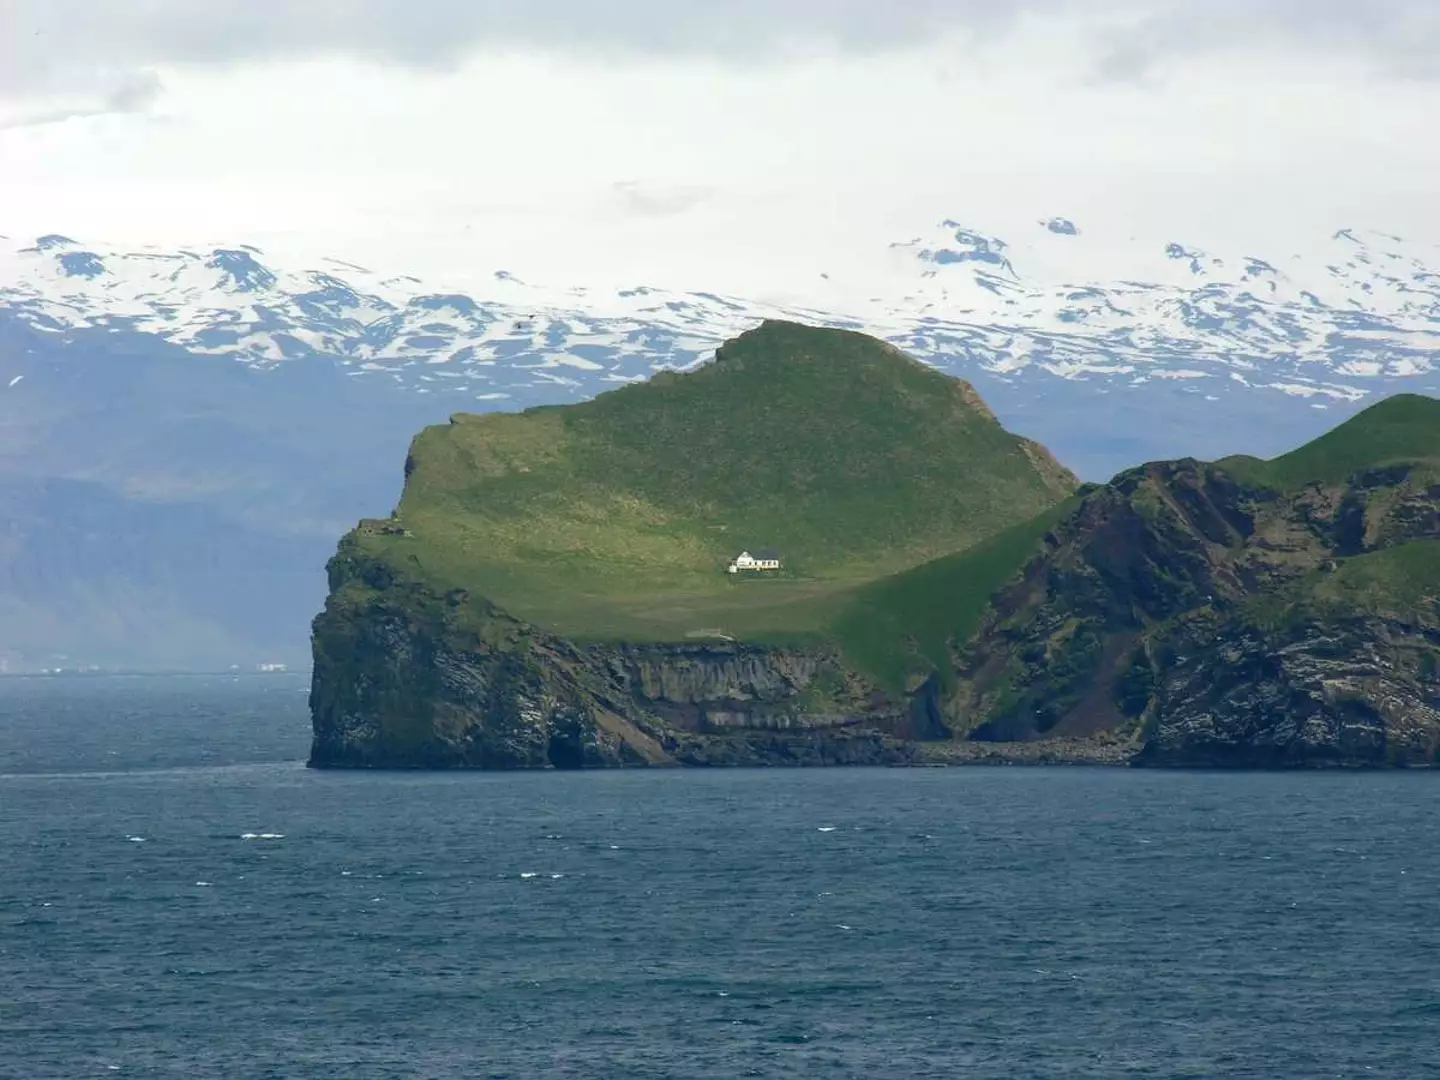 The remote location off the south of Iceland.